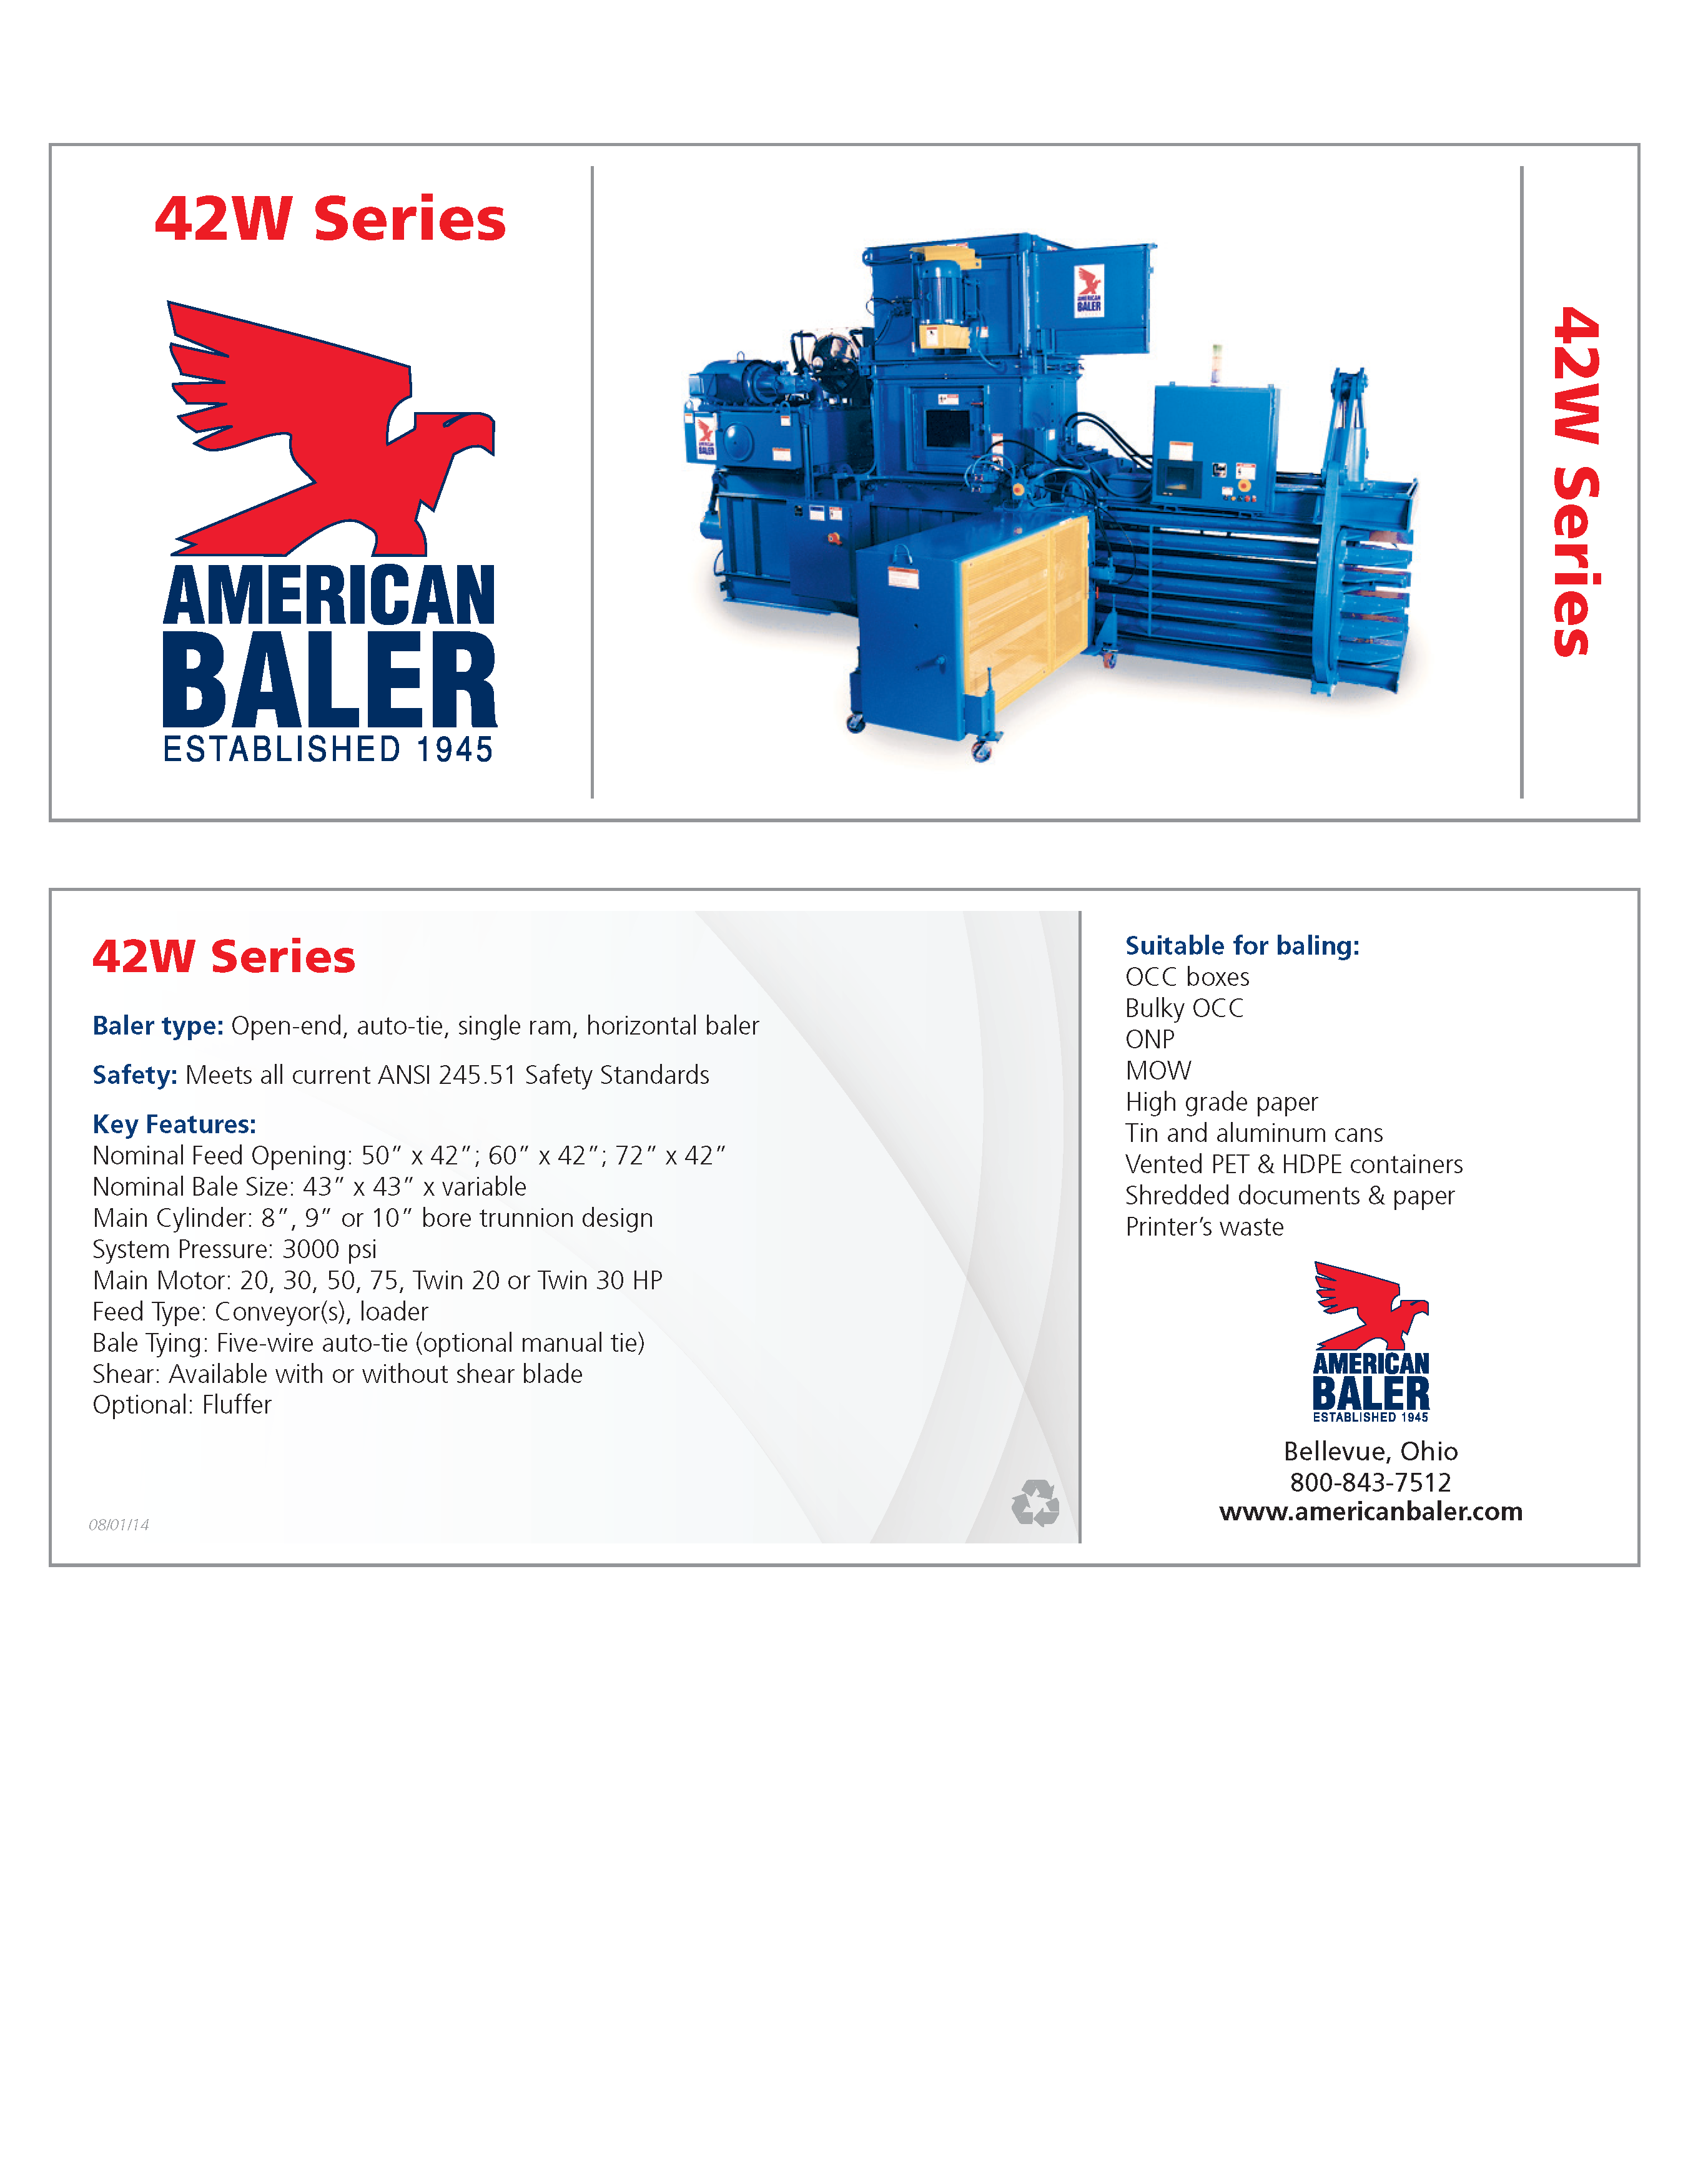 Learn more about the 42WS Series Baler in the American Baler Brochure. 